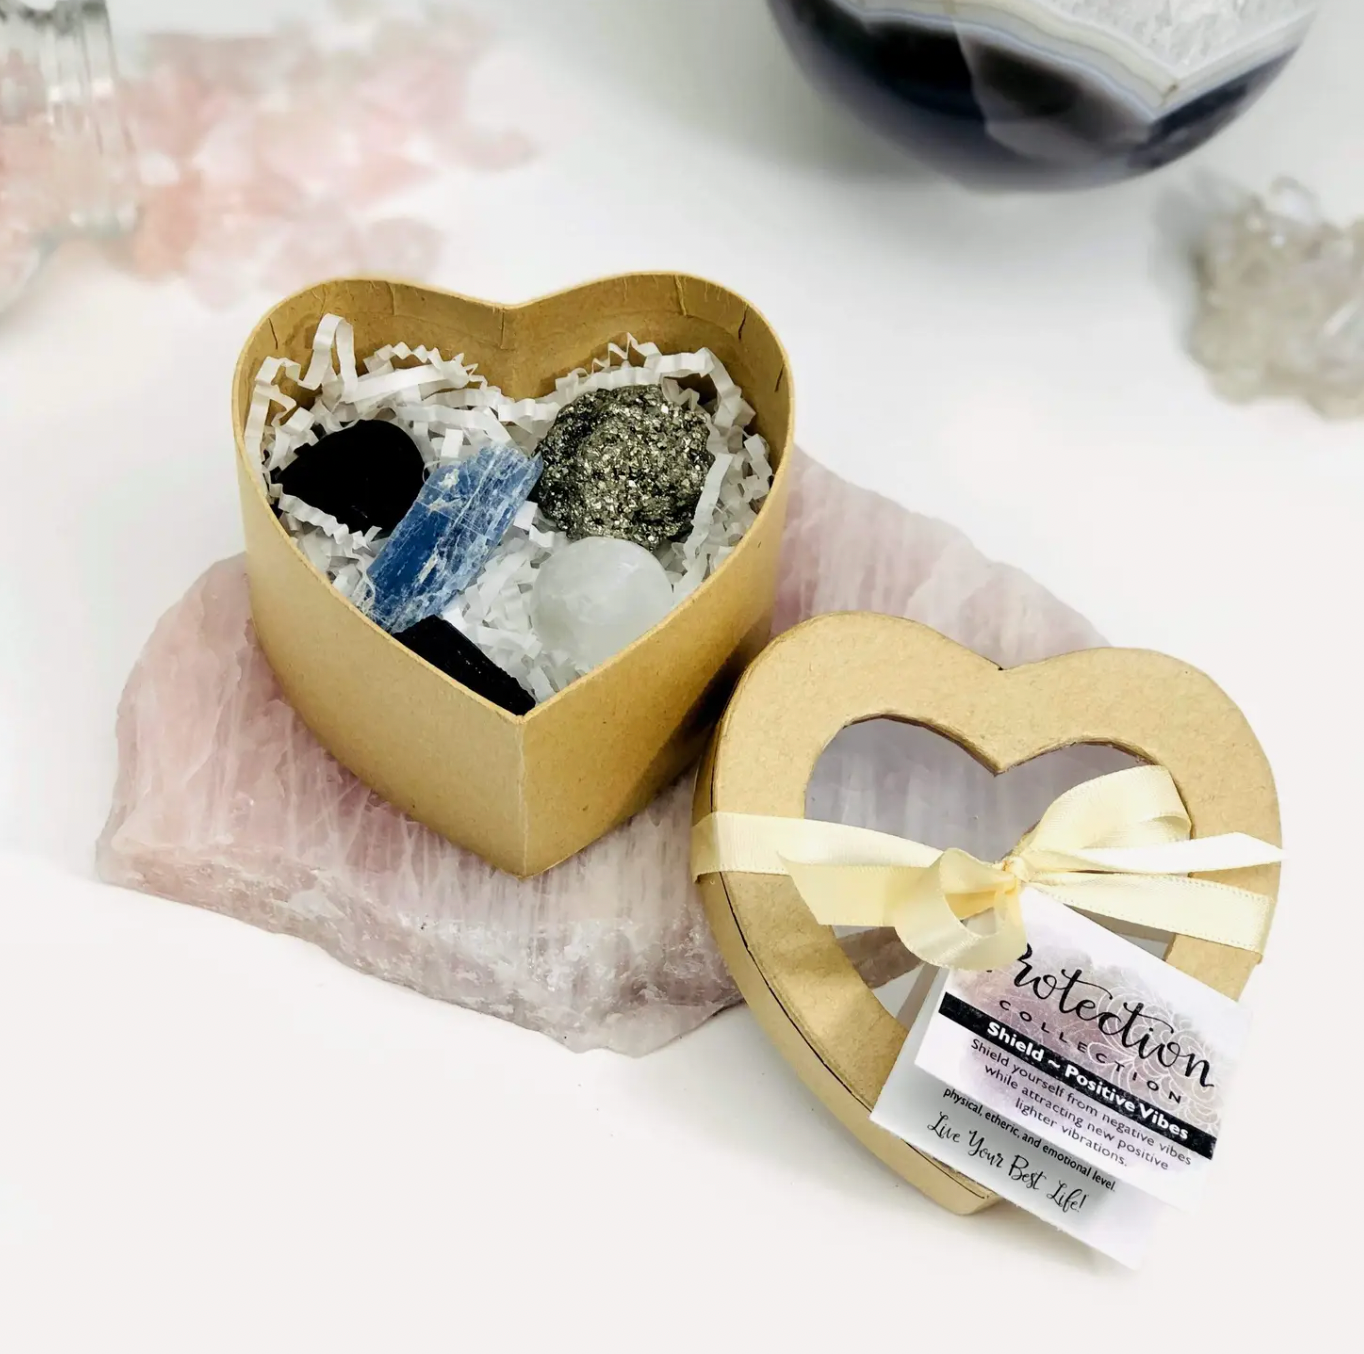 Crystal Healing Protection Set of Stones in Heart Shaped Box